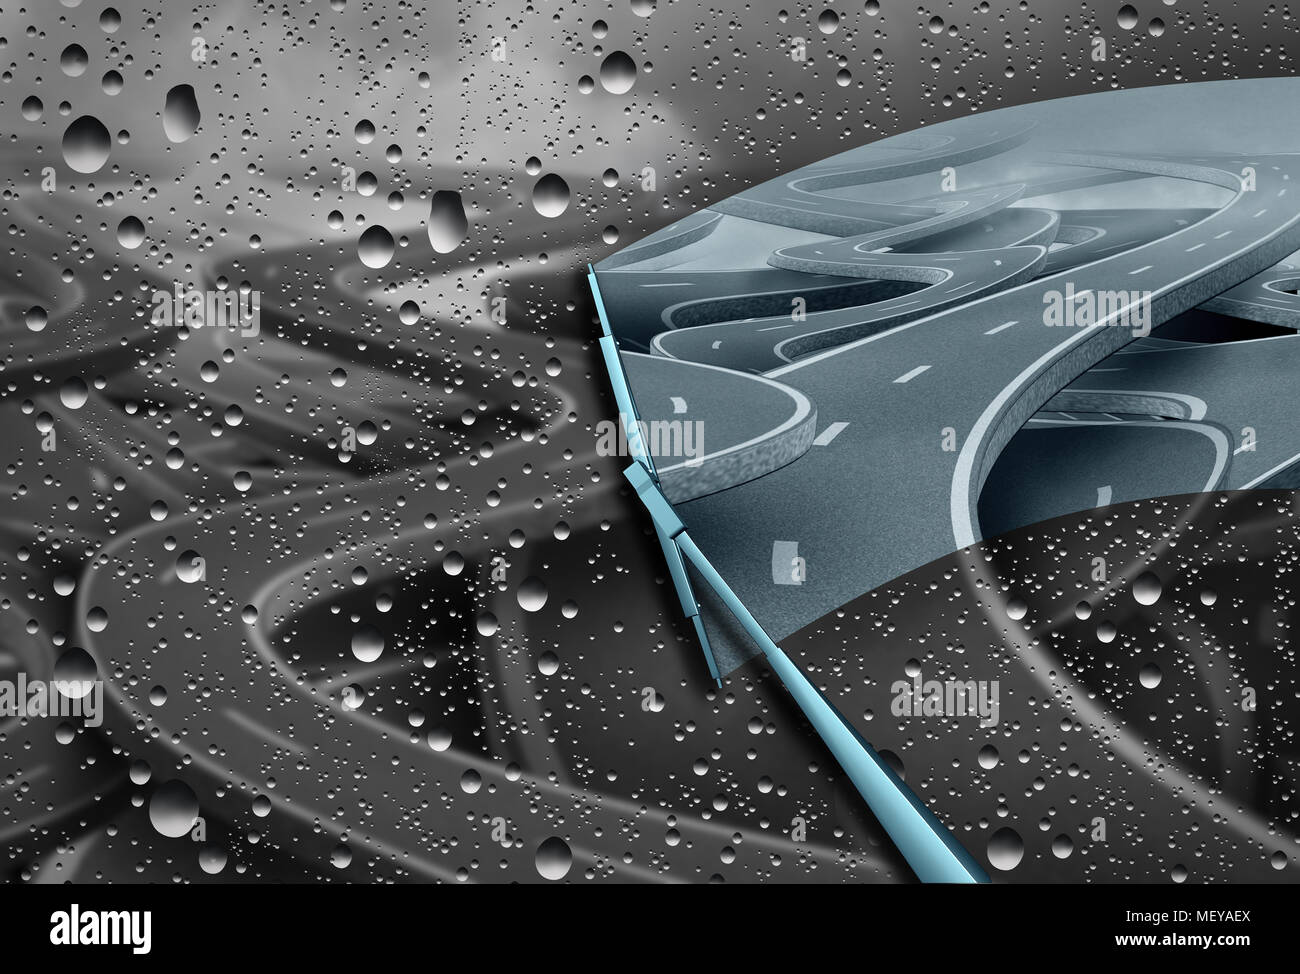 Business information explanation concept as a wiper clearing a rainy windshield revealing pathways and roads as a 3D illustration. Stock Photo